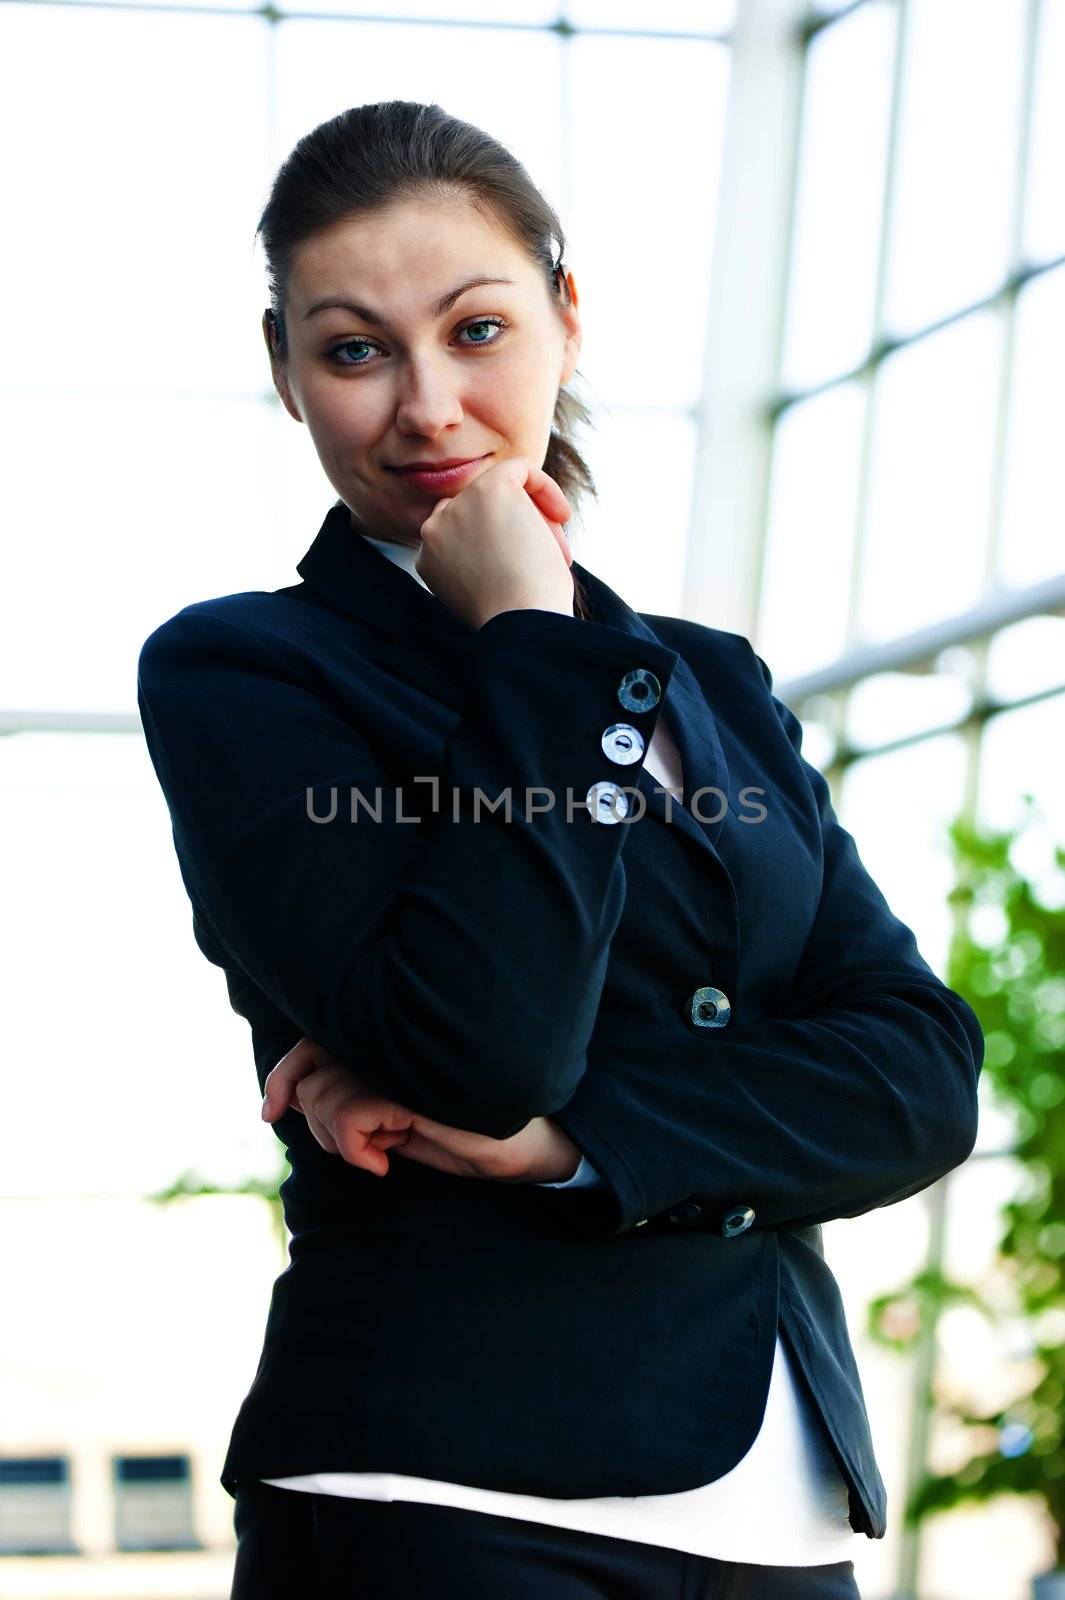 Portrait of successful business woman smiling on the background of a blurred office interior by kosmsos111